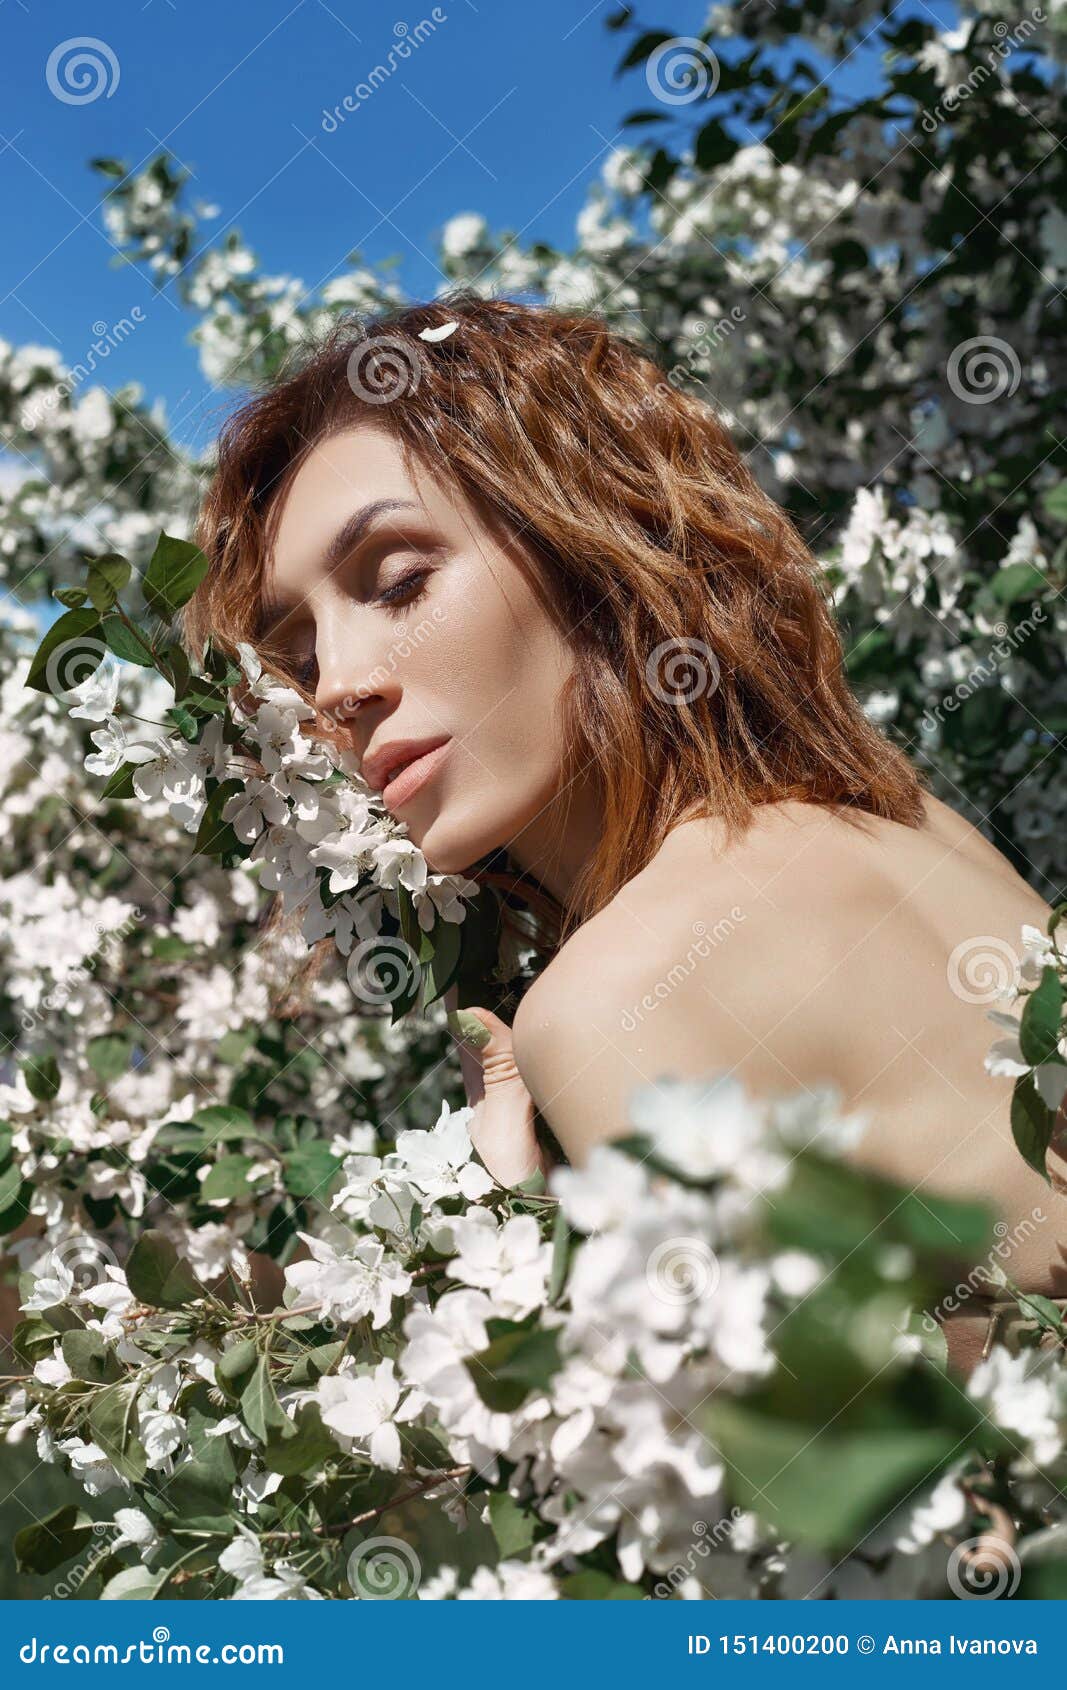 Beautiful Nude Art Woman In Branches And Foliage Of A Flowering Apple